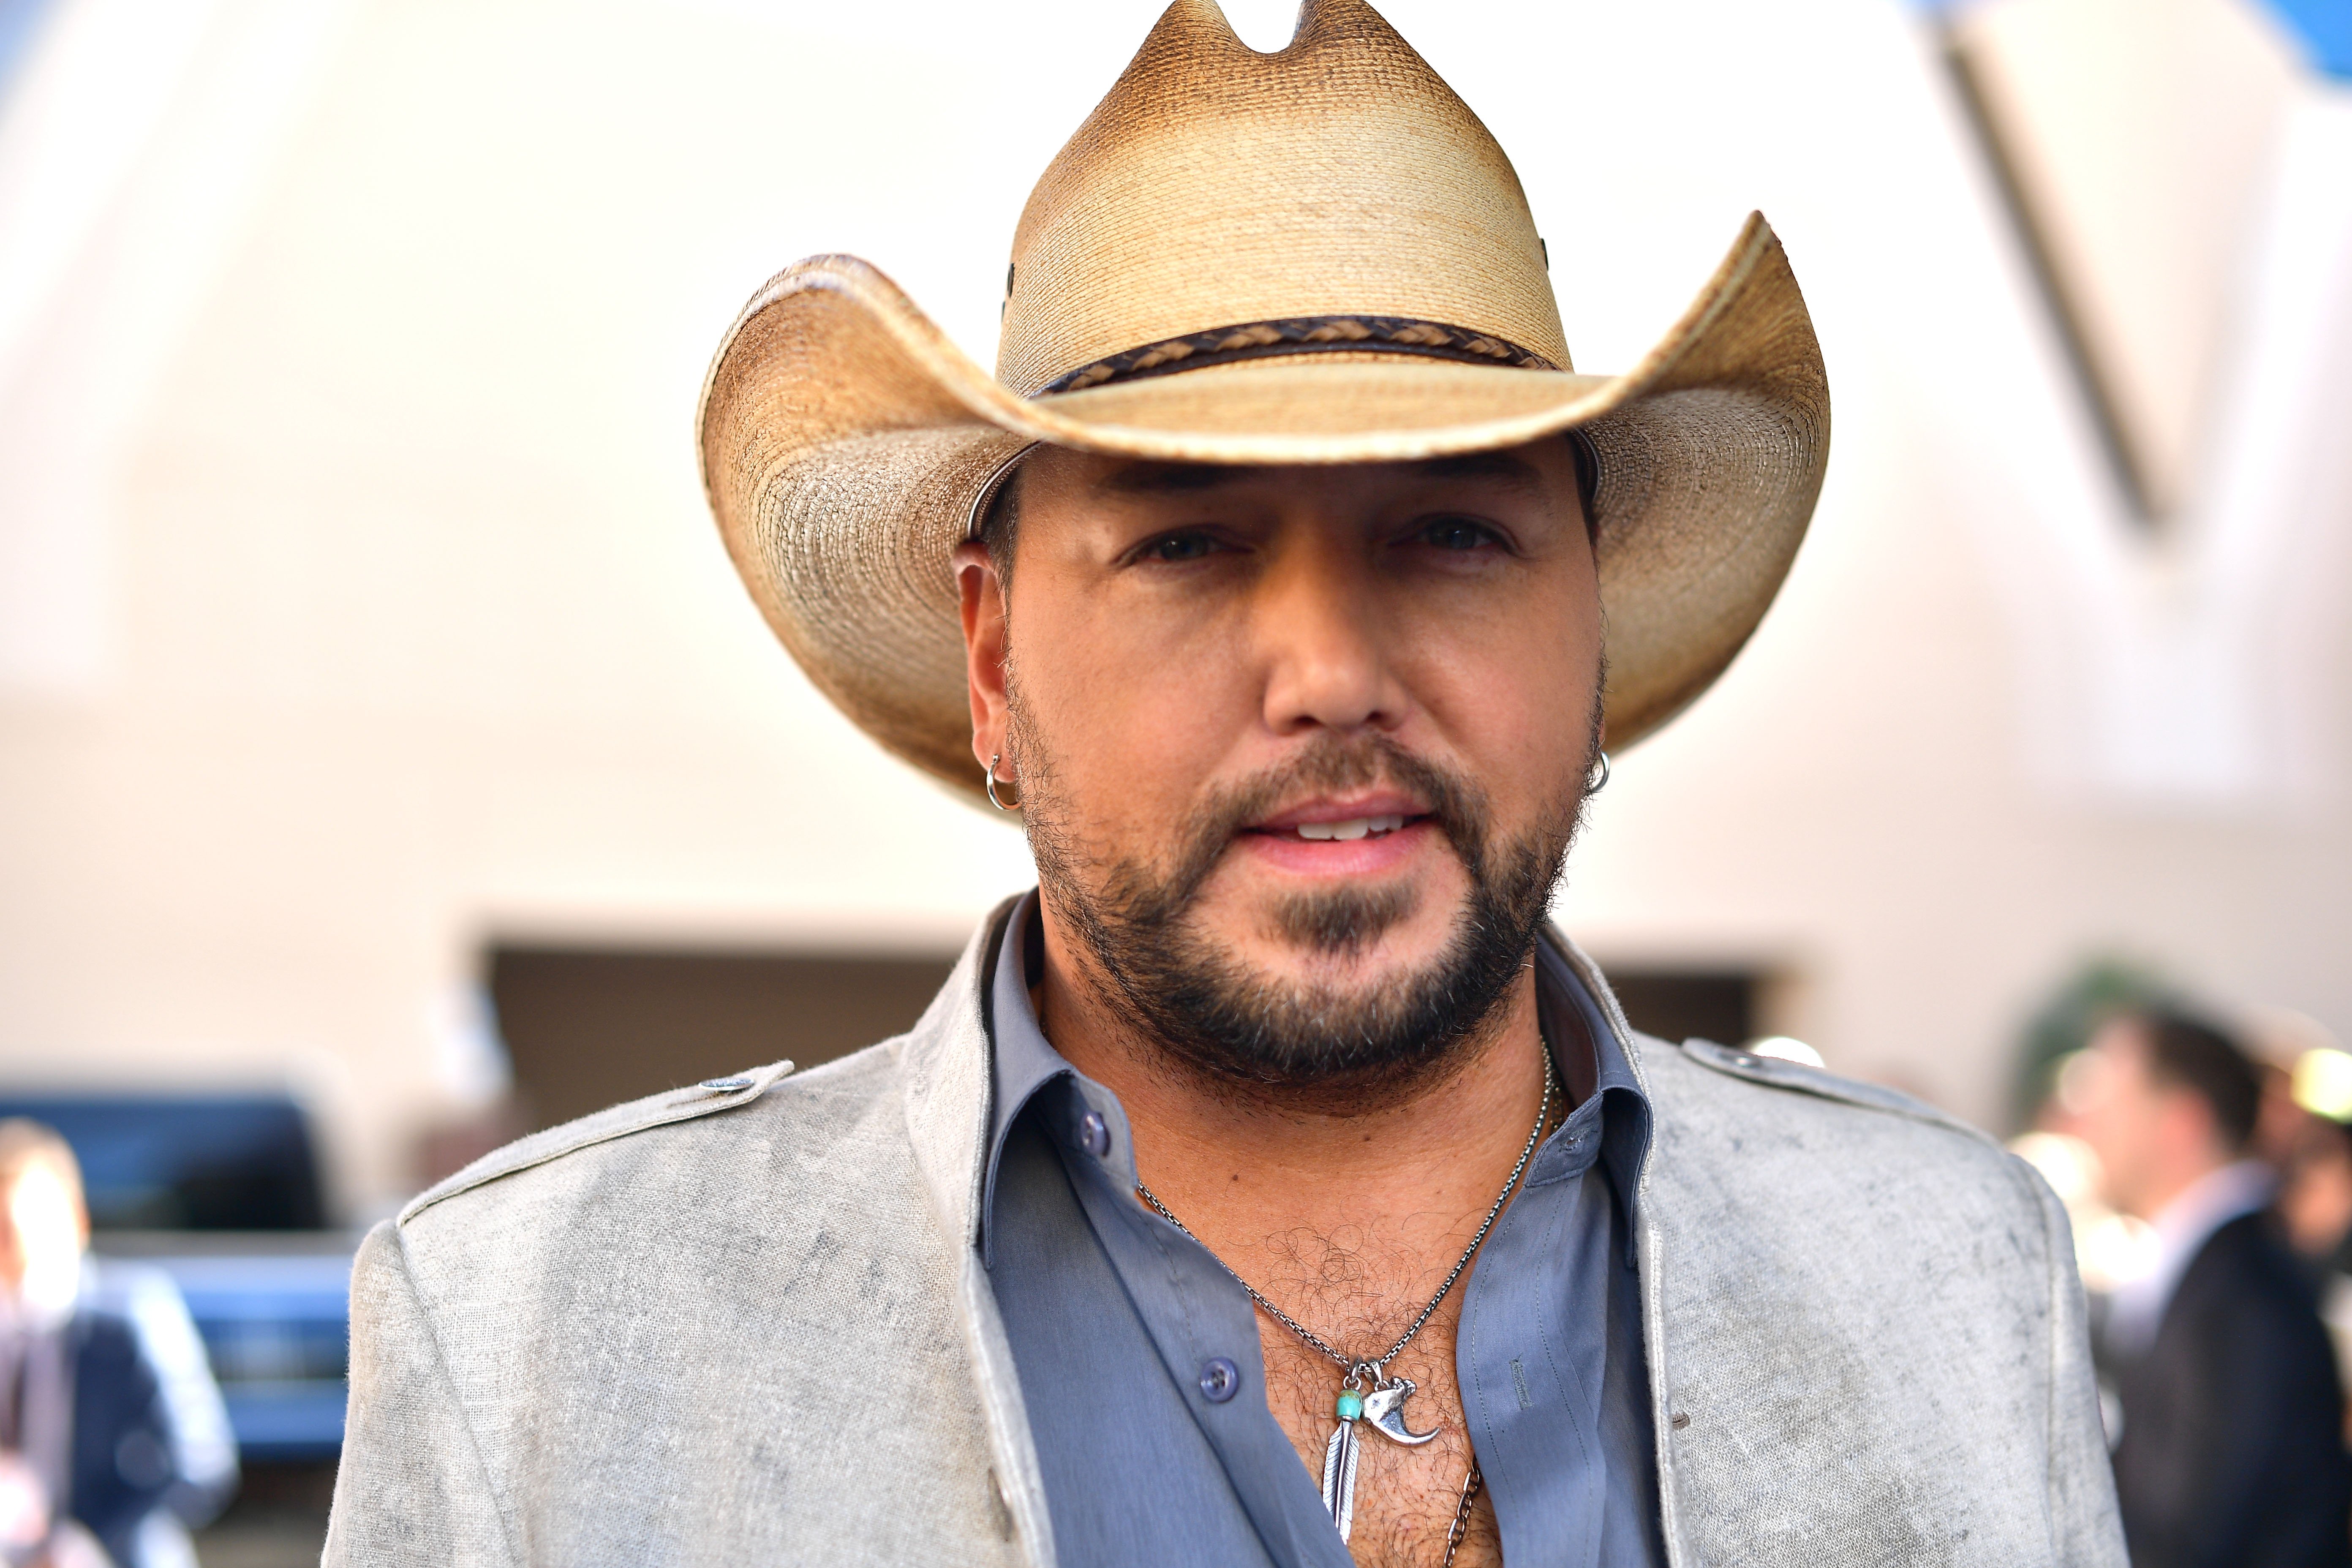 Jason Aldean at the 54th Academy Of Country Music Awards on April 07, 2019 in Las Vegas, Nevada. | Photo: Getty Images 